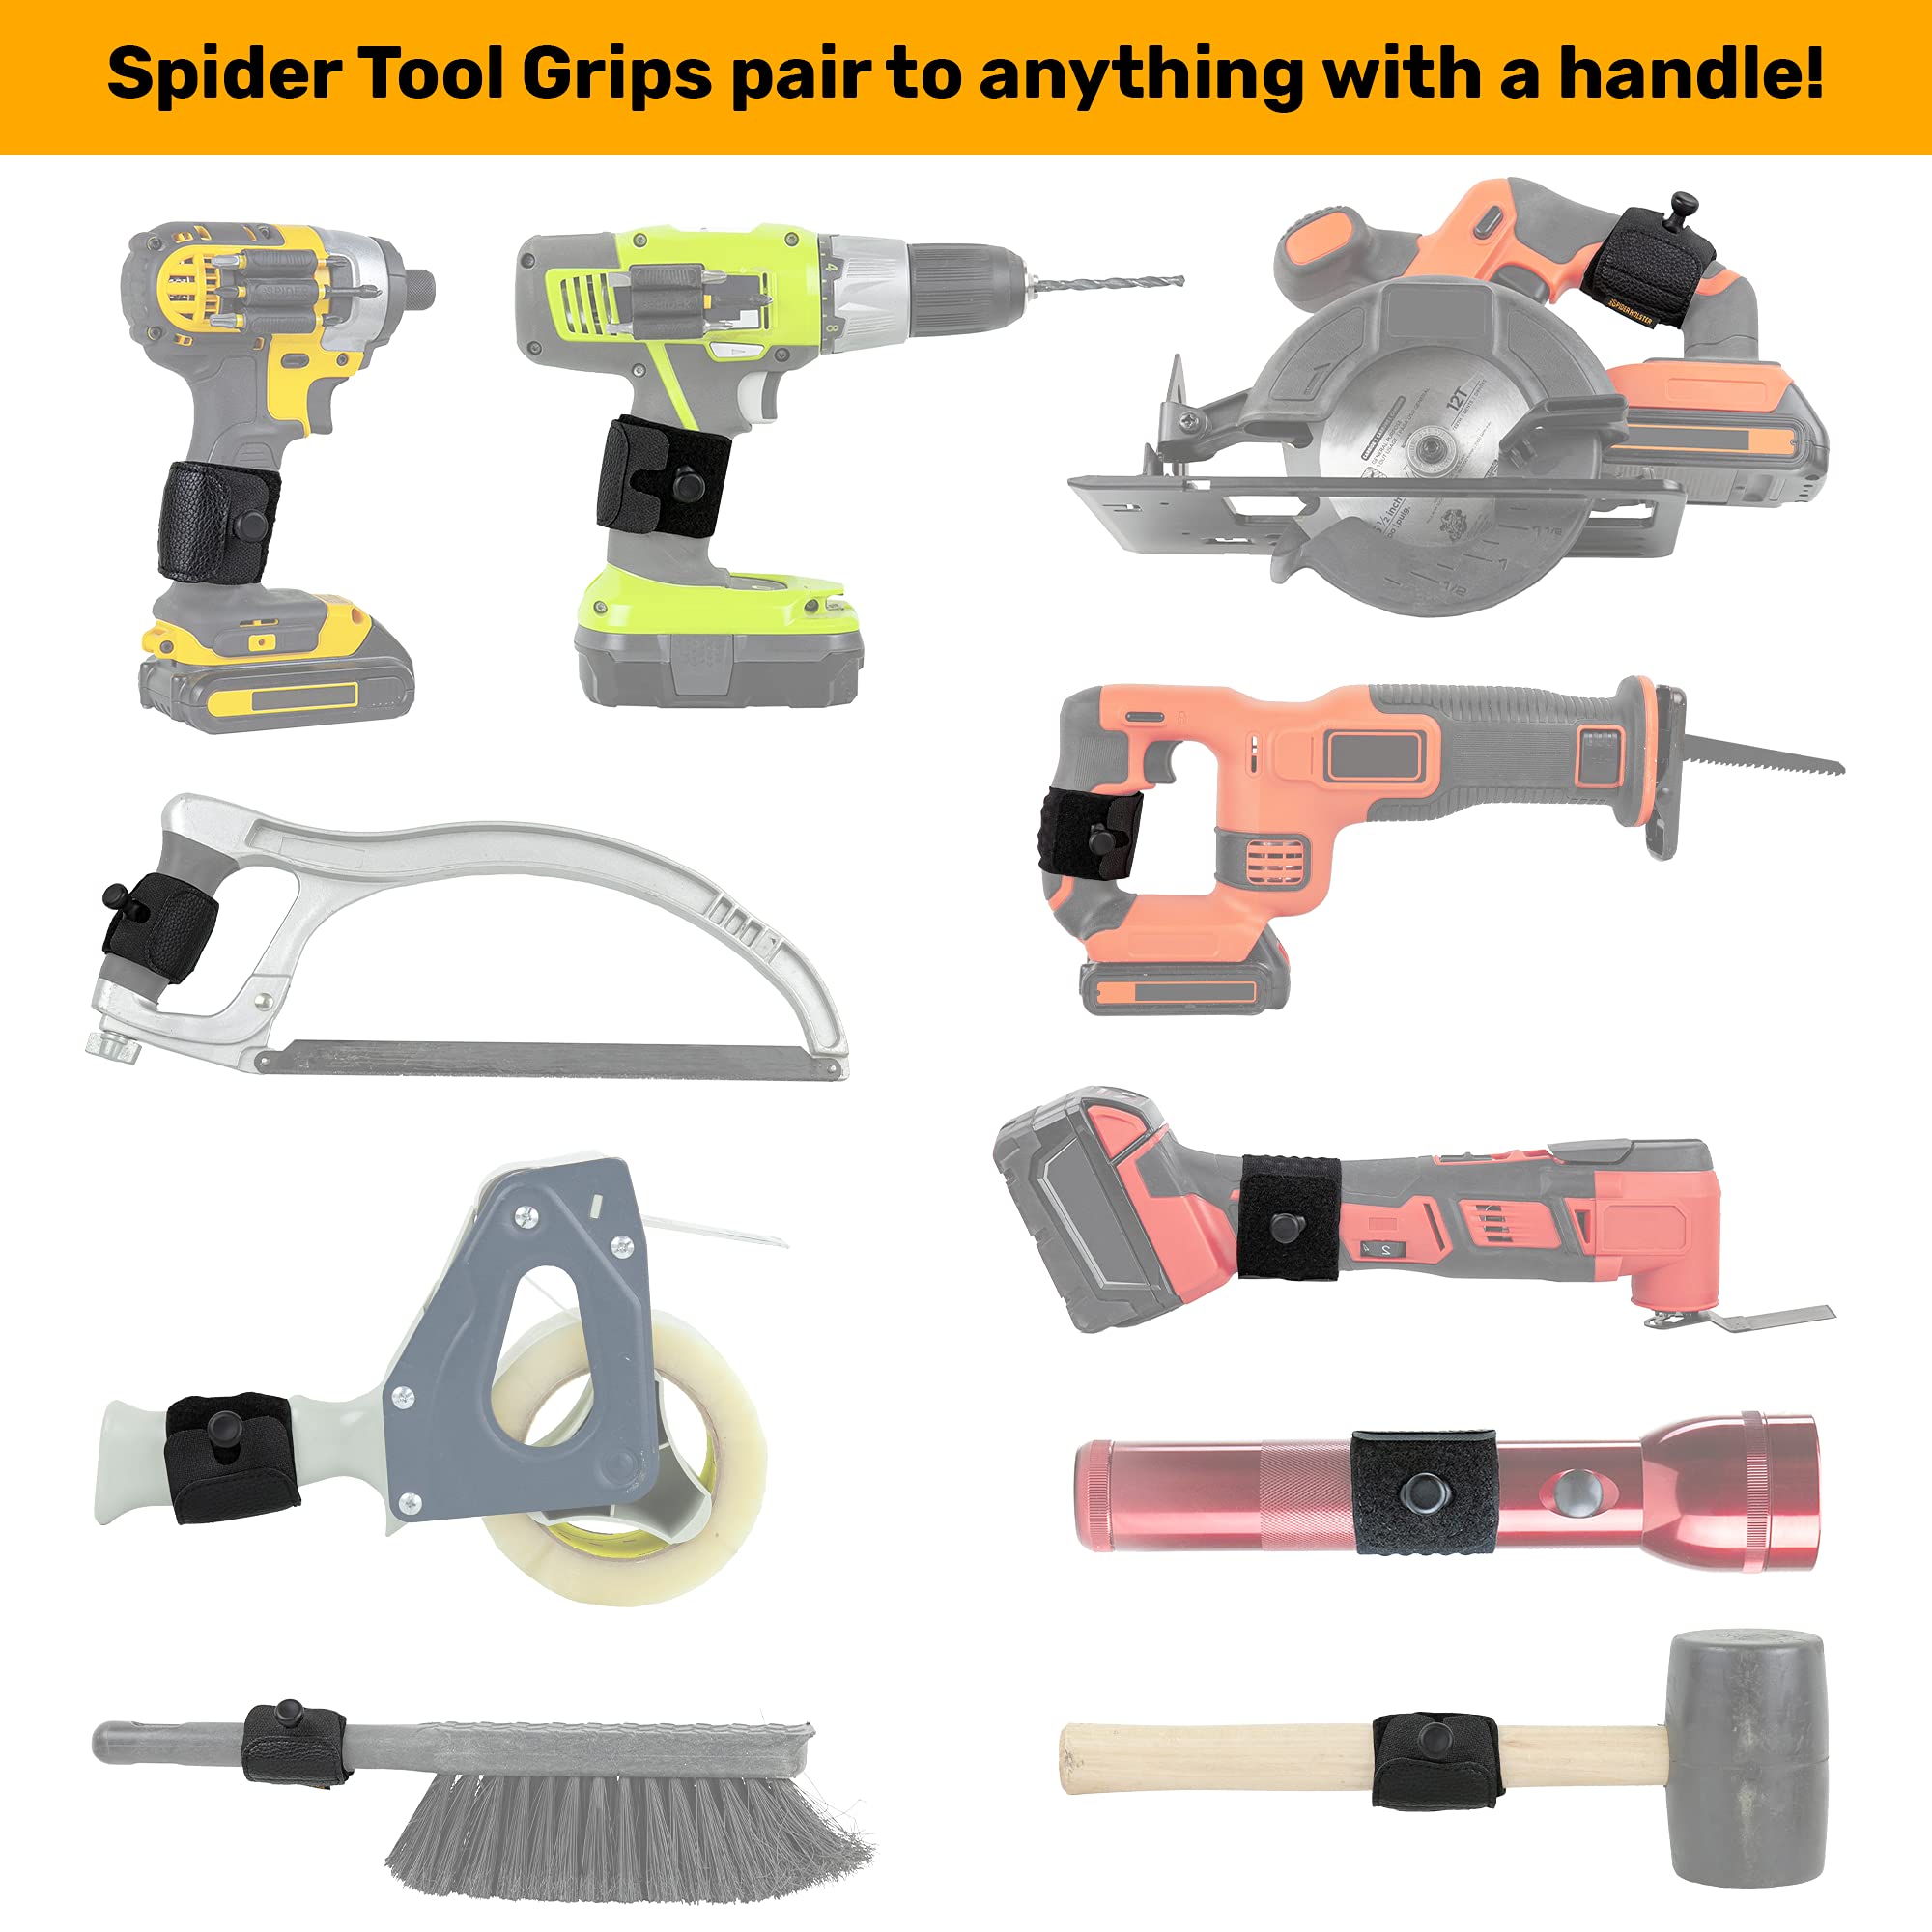 Spider Tool Holster Set - Self Locking, Quick Draw Belt Holster Clip + Elastic Tool Grip - Improve The Way You Carry Your Power Drill, Driver, Multitool, Pneumatic, Flashlight, Hammer, Saw and More! …